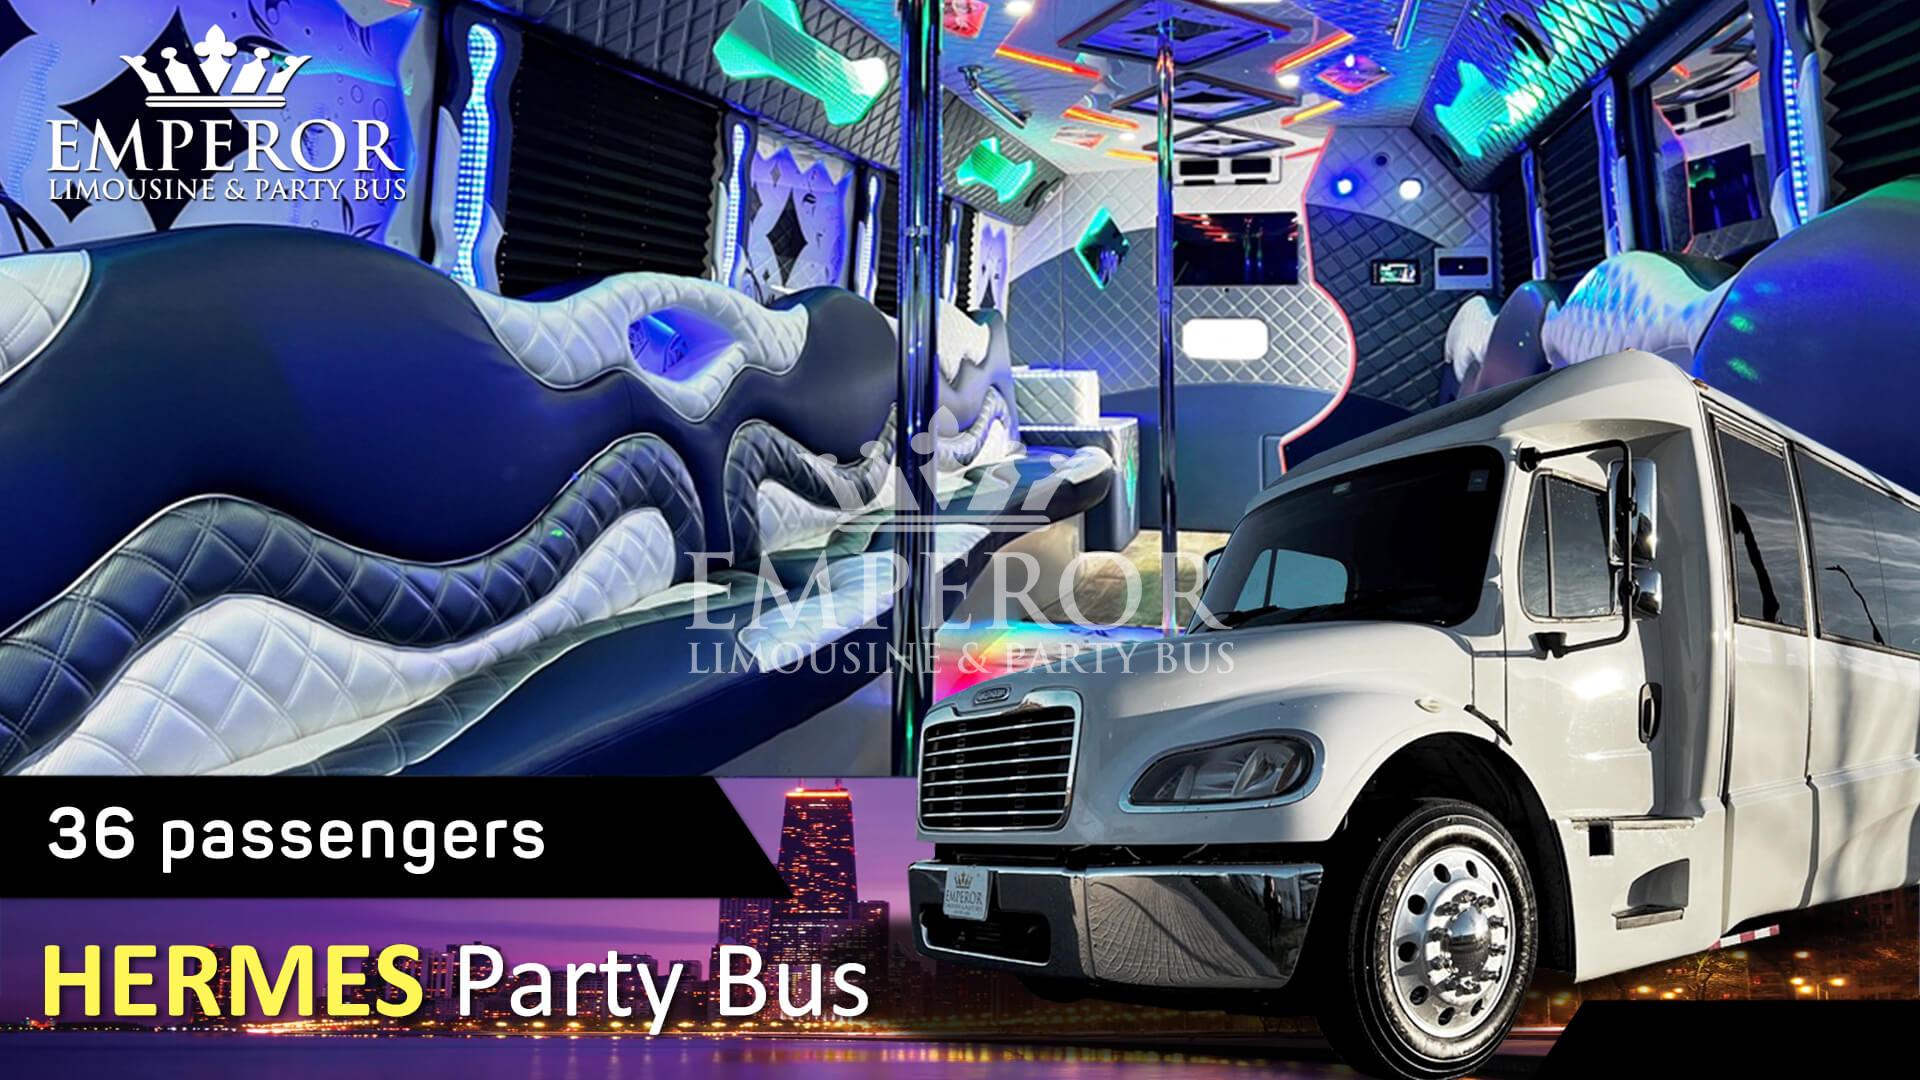 Party bus rental in Arlington Heights, IL - Hermes Edition